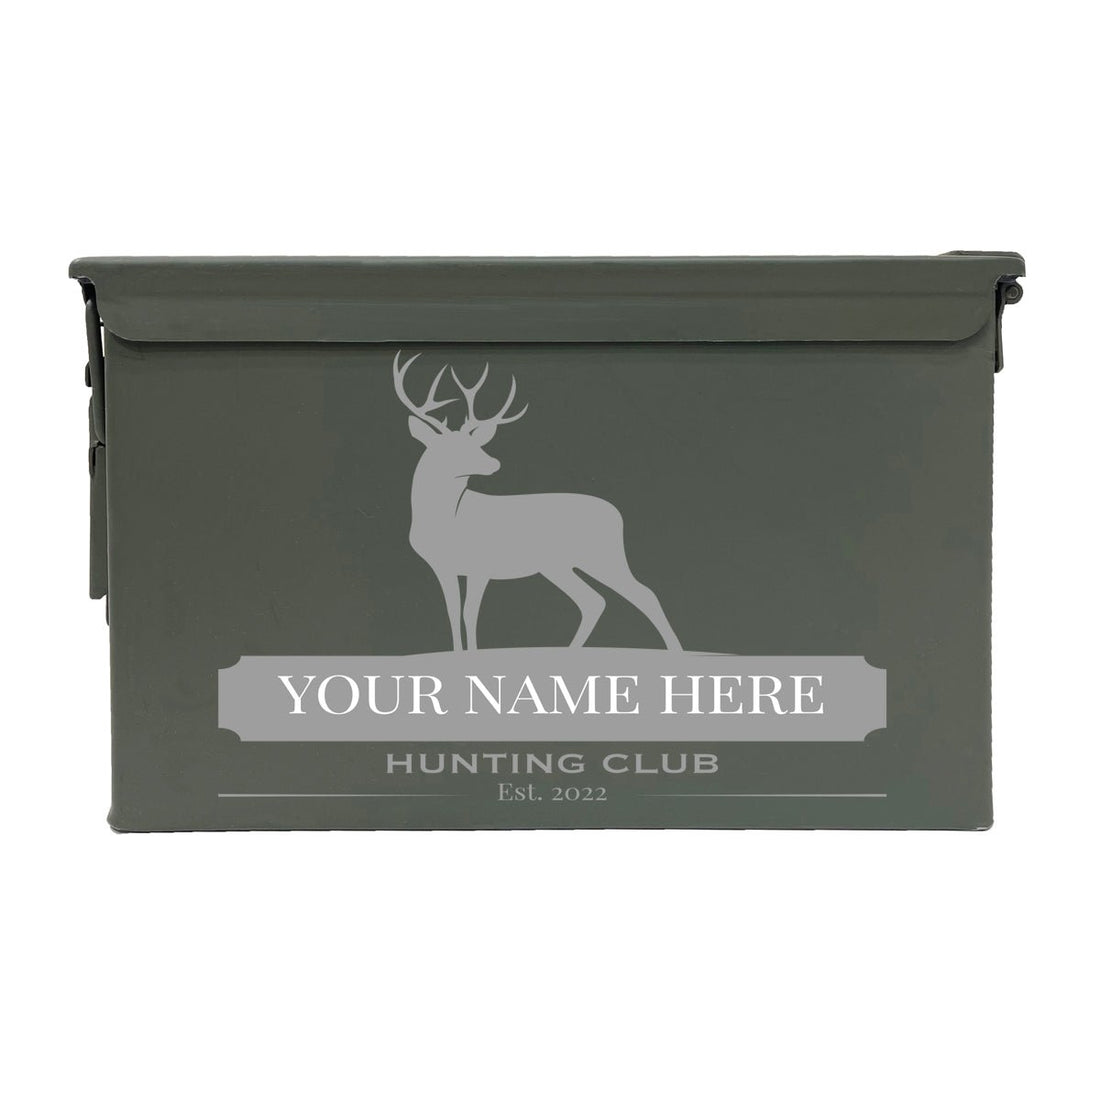 Laser Engraved - DEER HUNTING CLUB - Used Grade 1 Ammo Cans - 30 Cal, 50 Cal or Fat 50 - ATOM Promotions